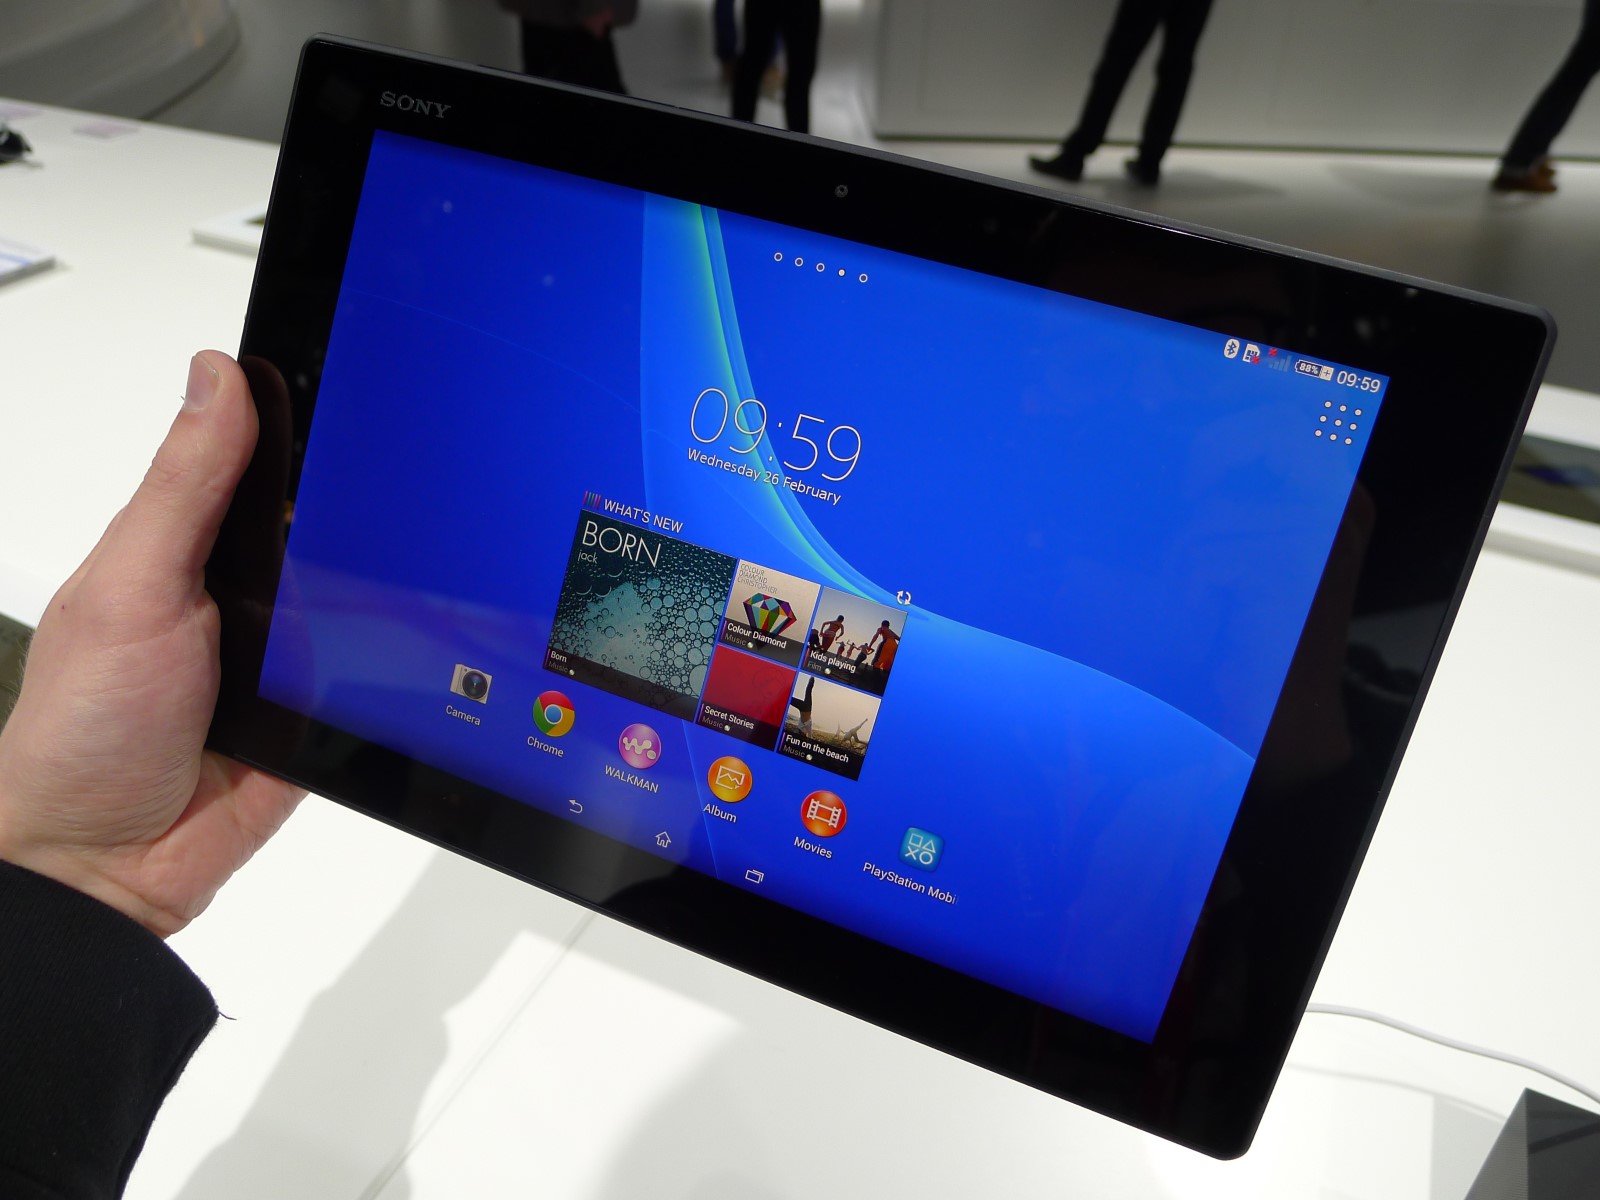 Powering Up: Charging The Sony Xperia Z2 Tablet